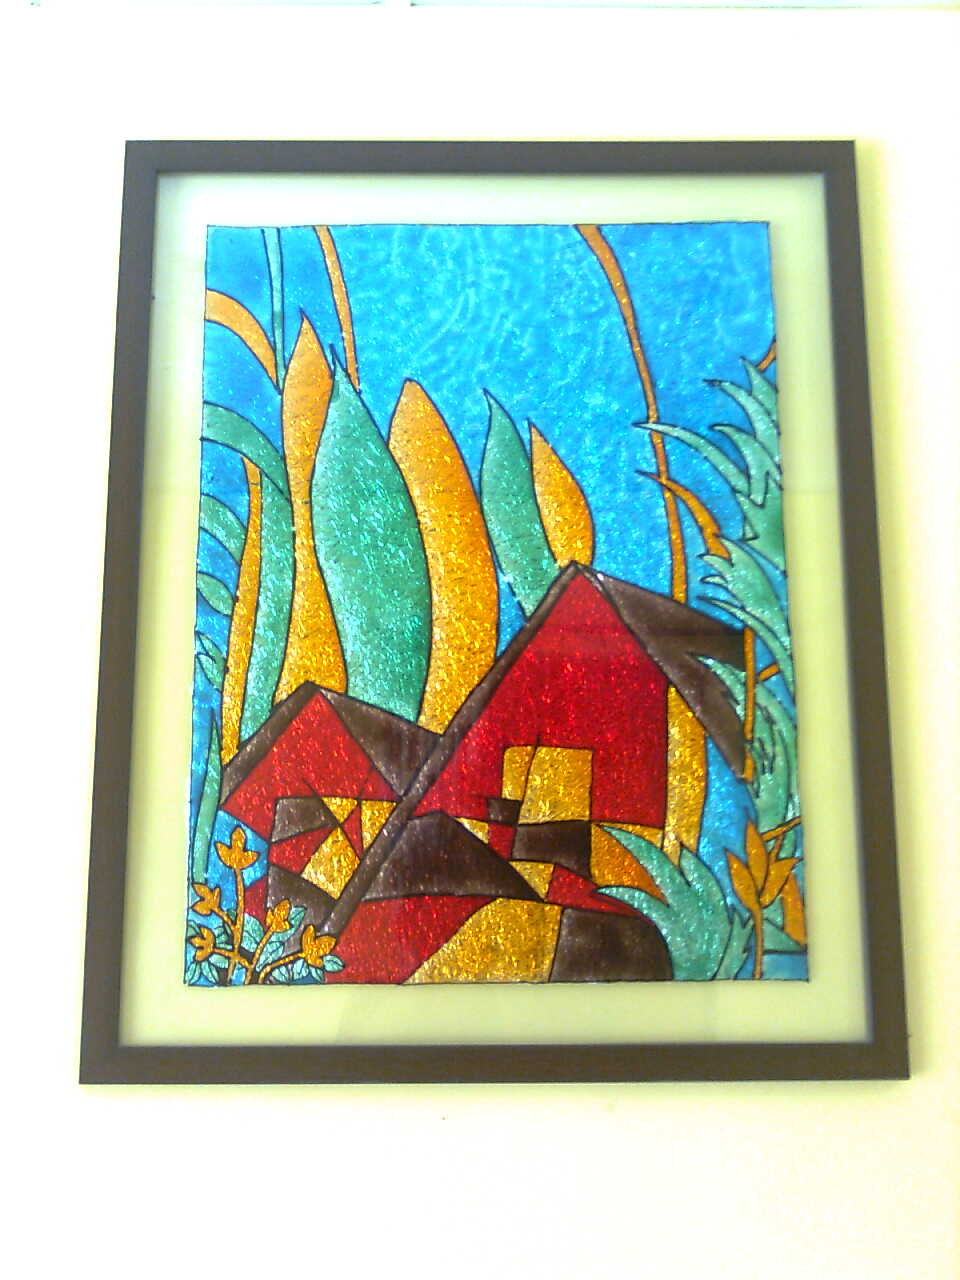 Painting Glass pictures painting glass JusArts: